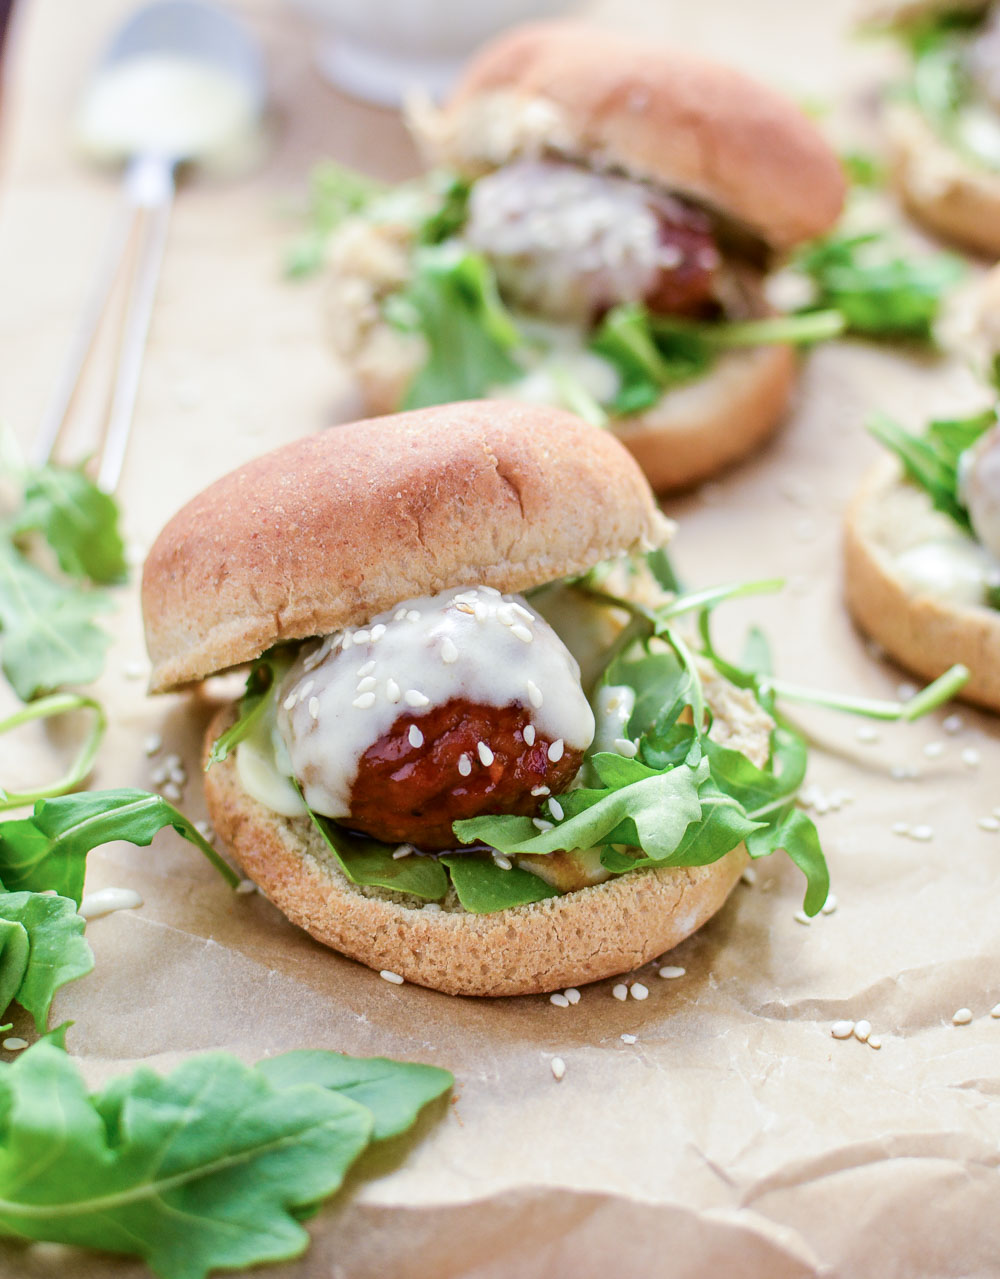 Asian Meatball Sliders are the perfect quick-bite appetizer recipe for entertaining this holiday season!